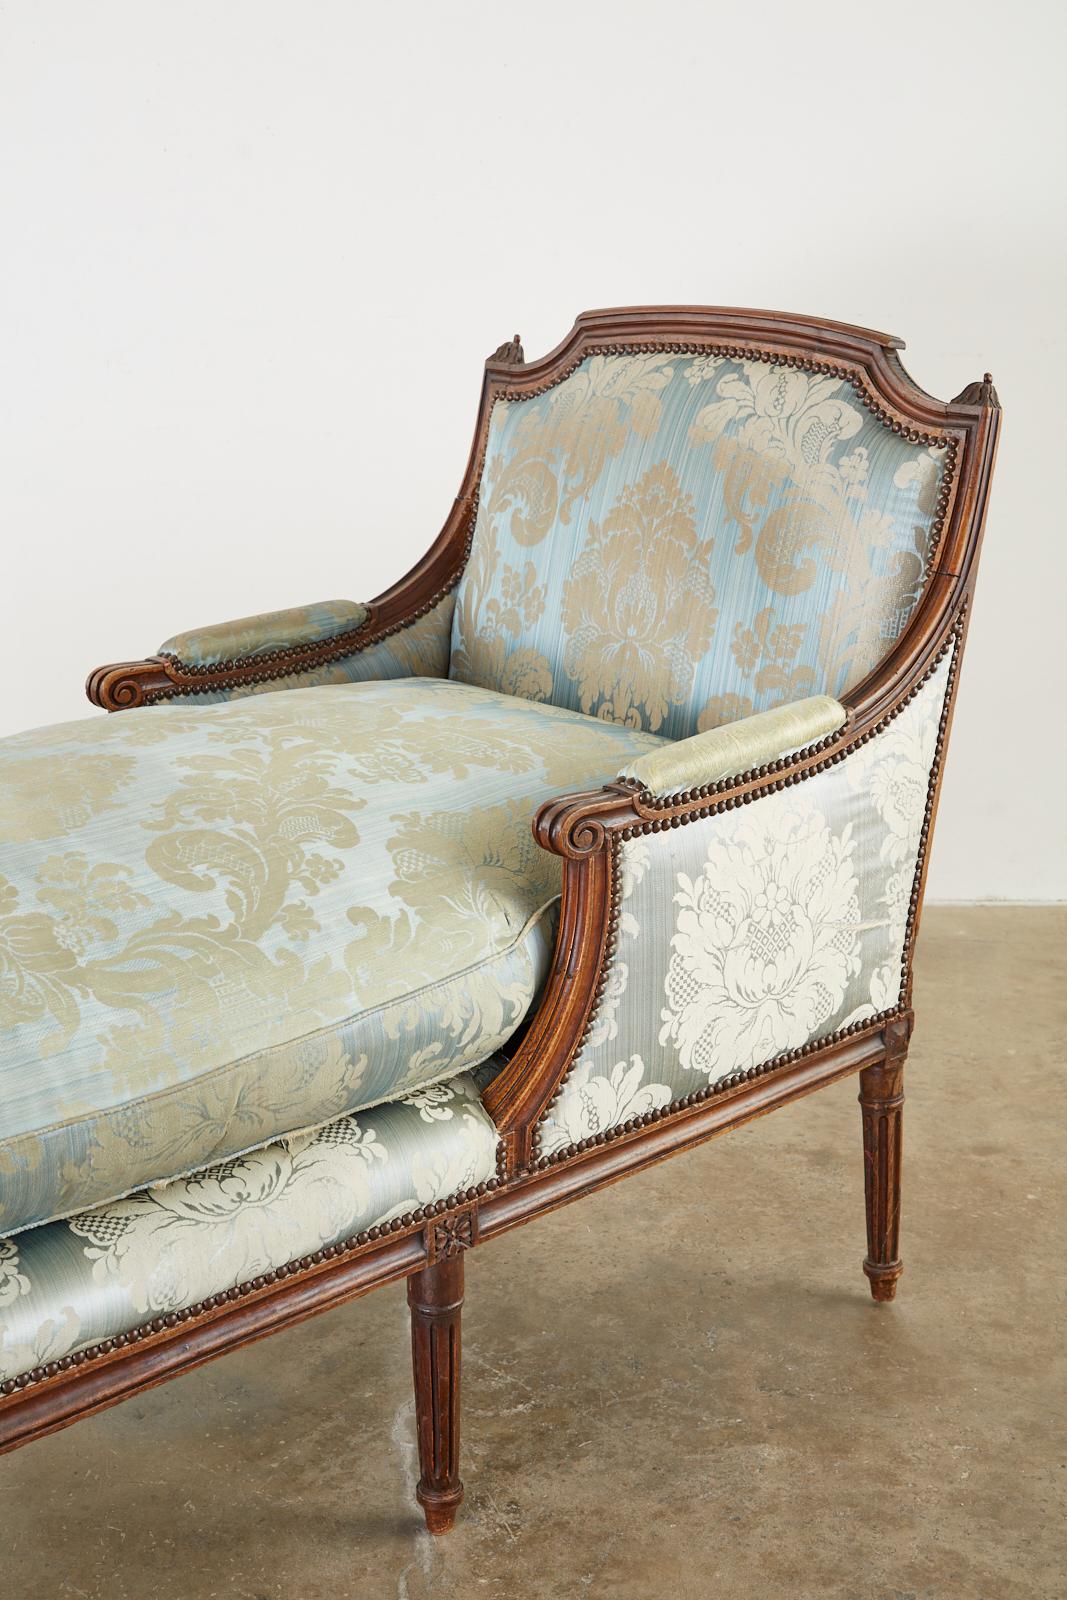 Hand-Crafted 19th Century French Louis XVI Style Chaise Lounge Daybed